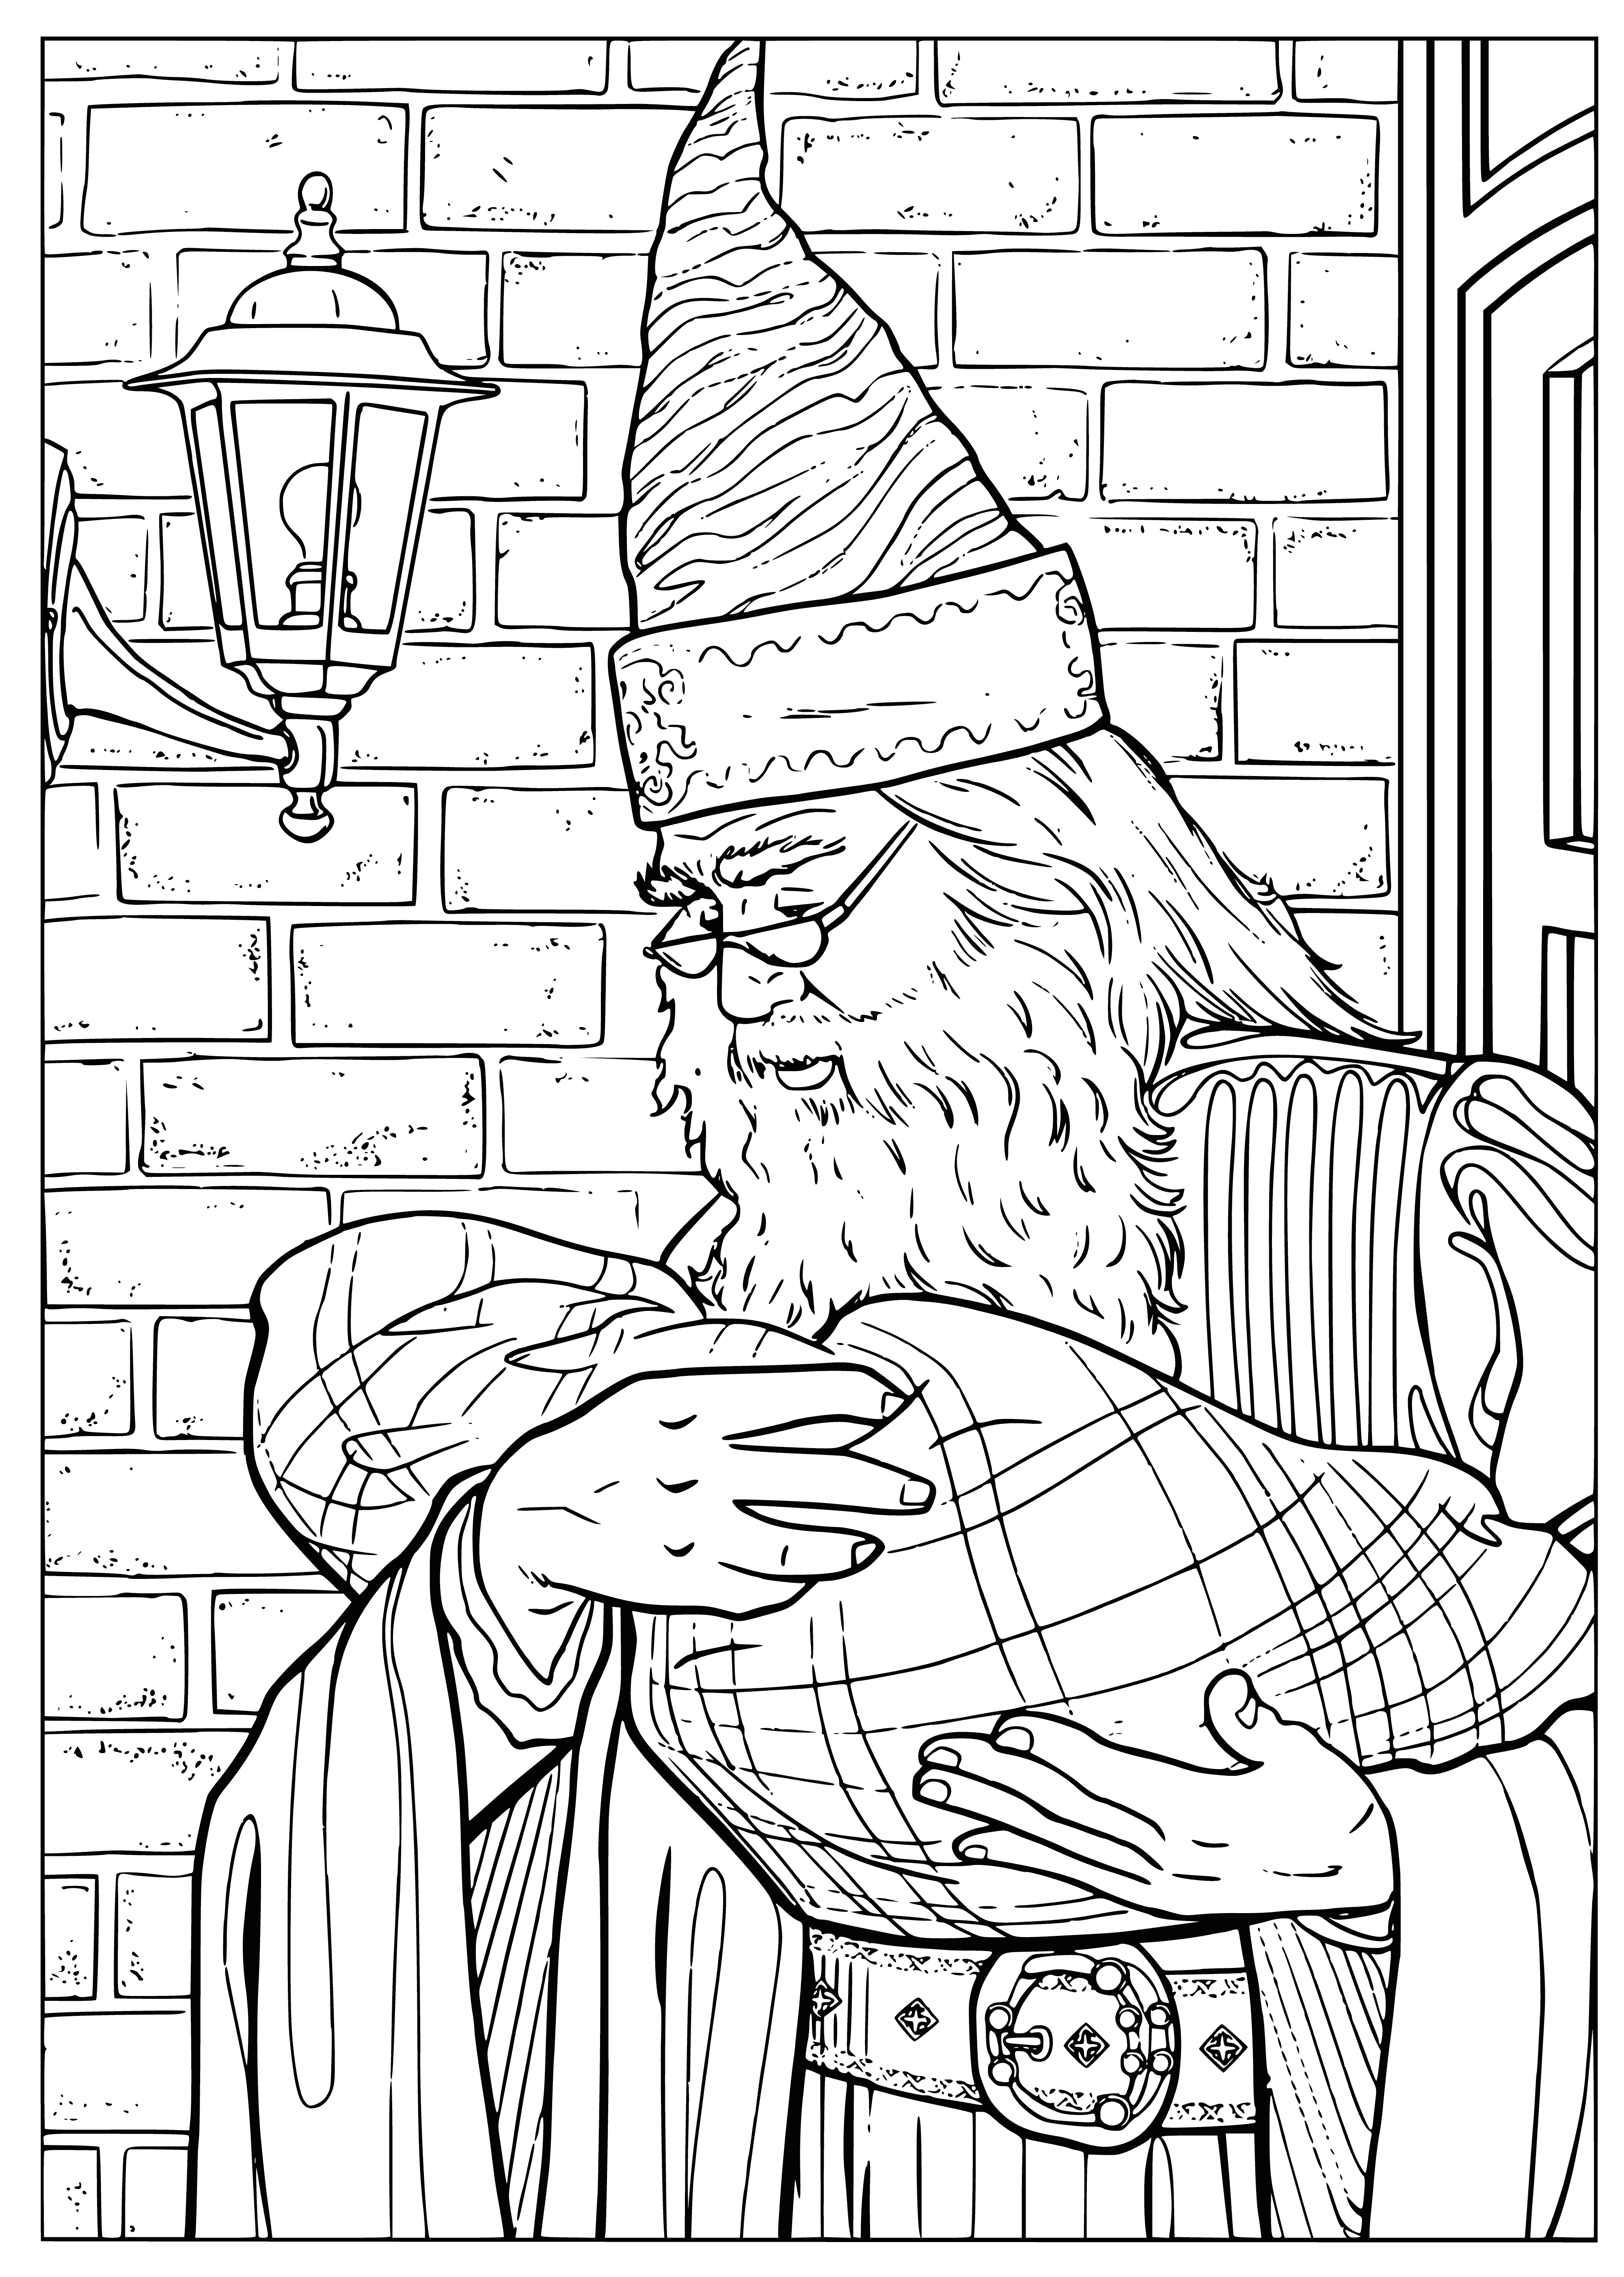 coloring page: Harry and Dumbledore, teens and elder, converse in front of a fireplace. Life-changing words?